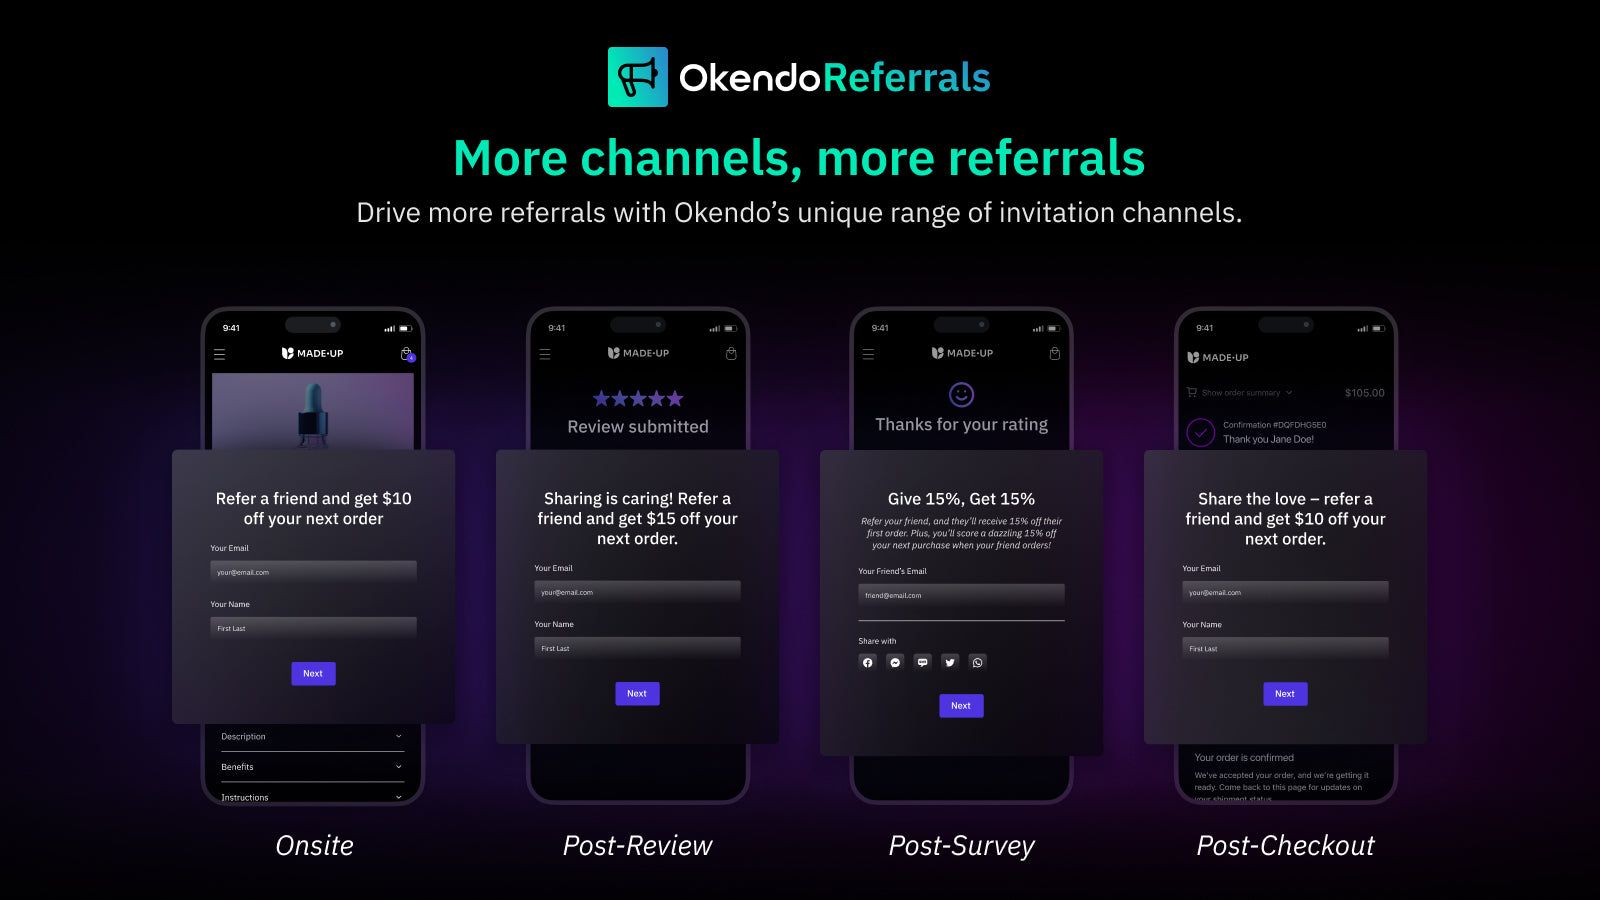 More channels, more referrals